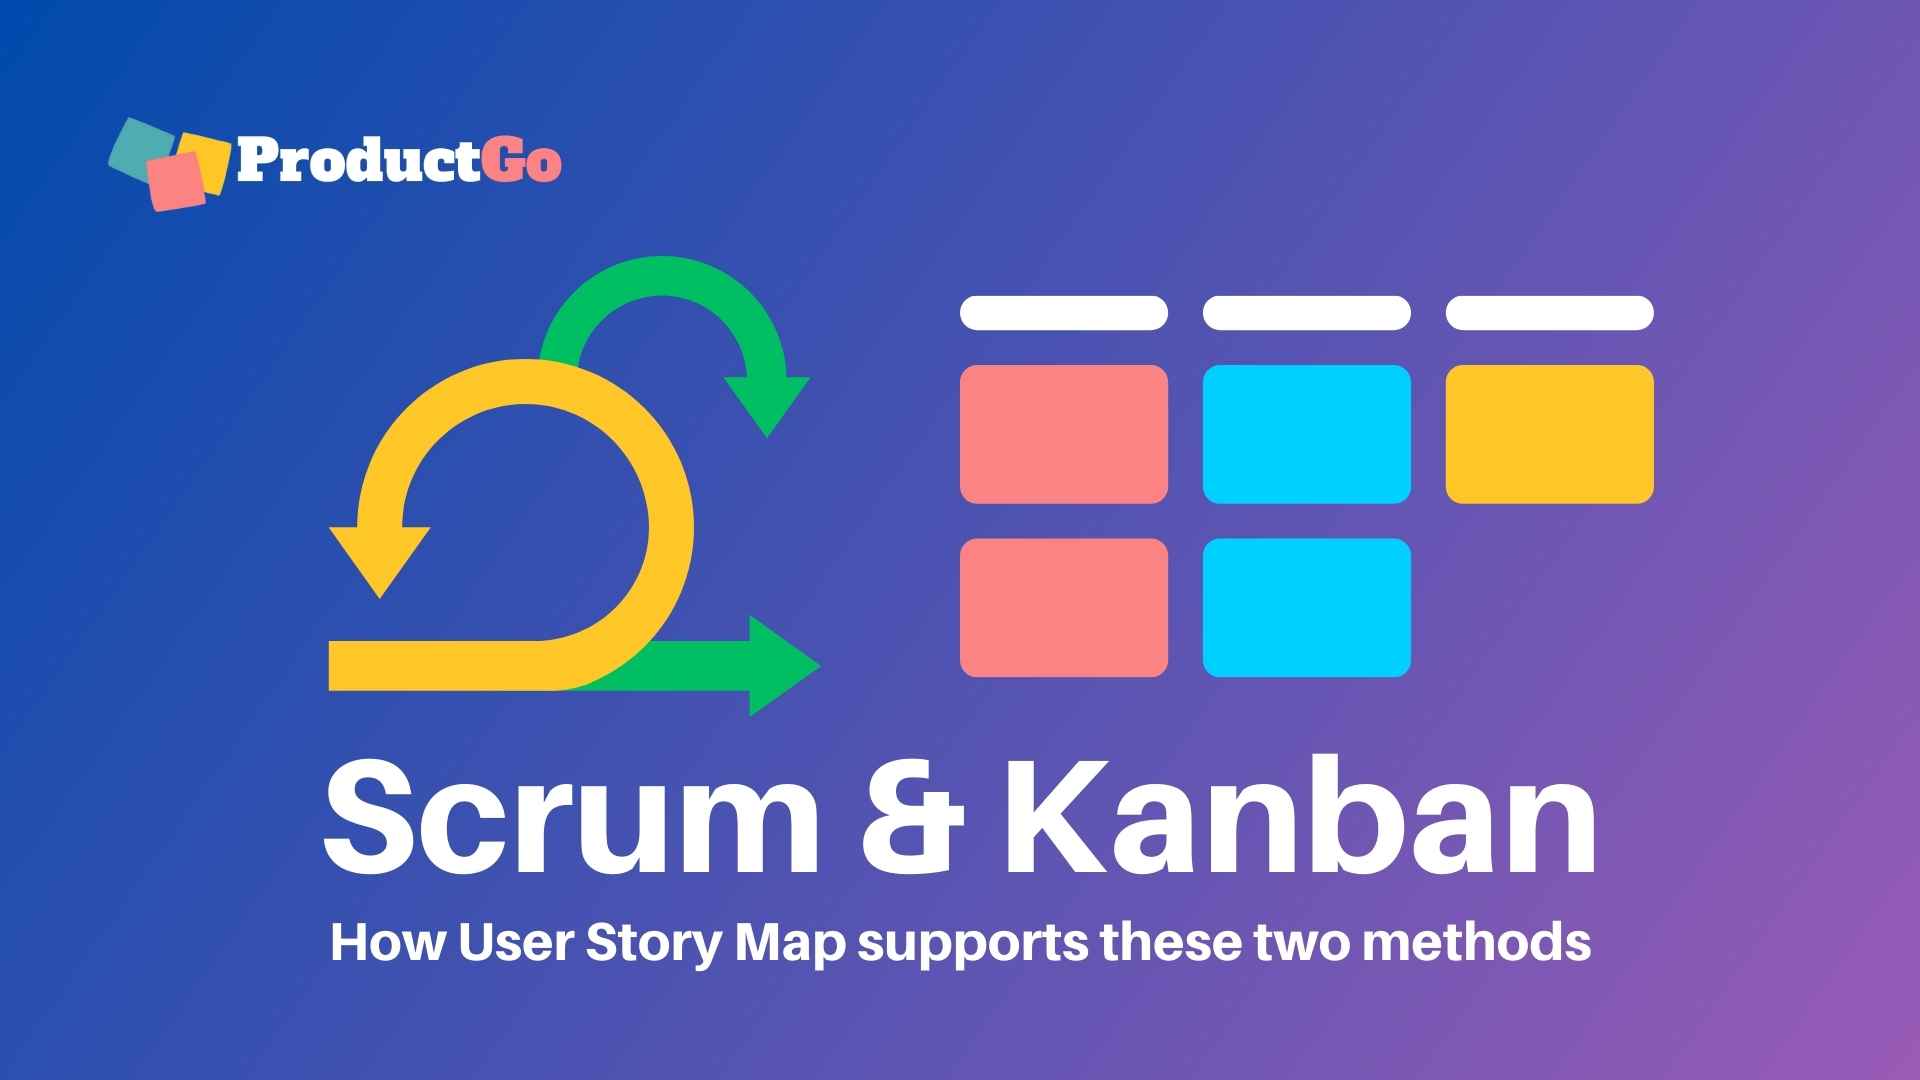 Scrum & Kanban, how User Story Map supports these two methods